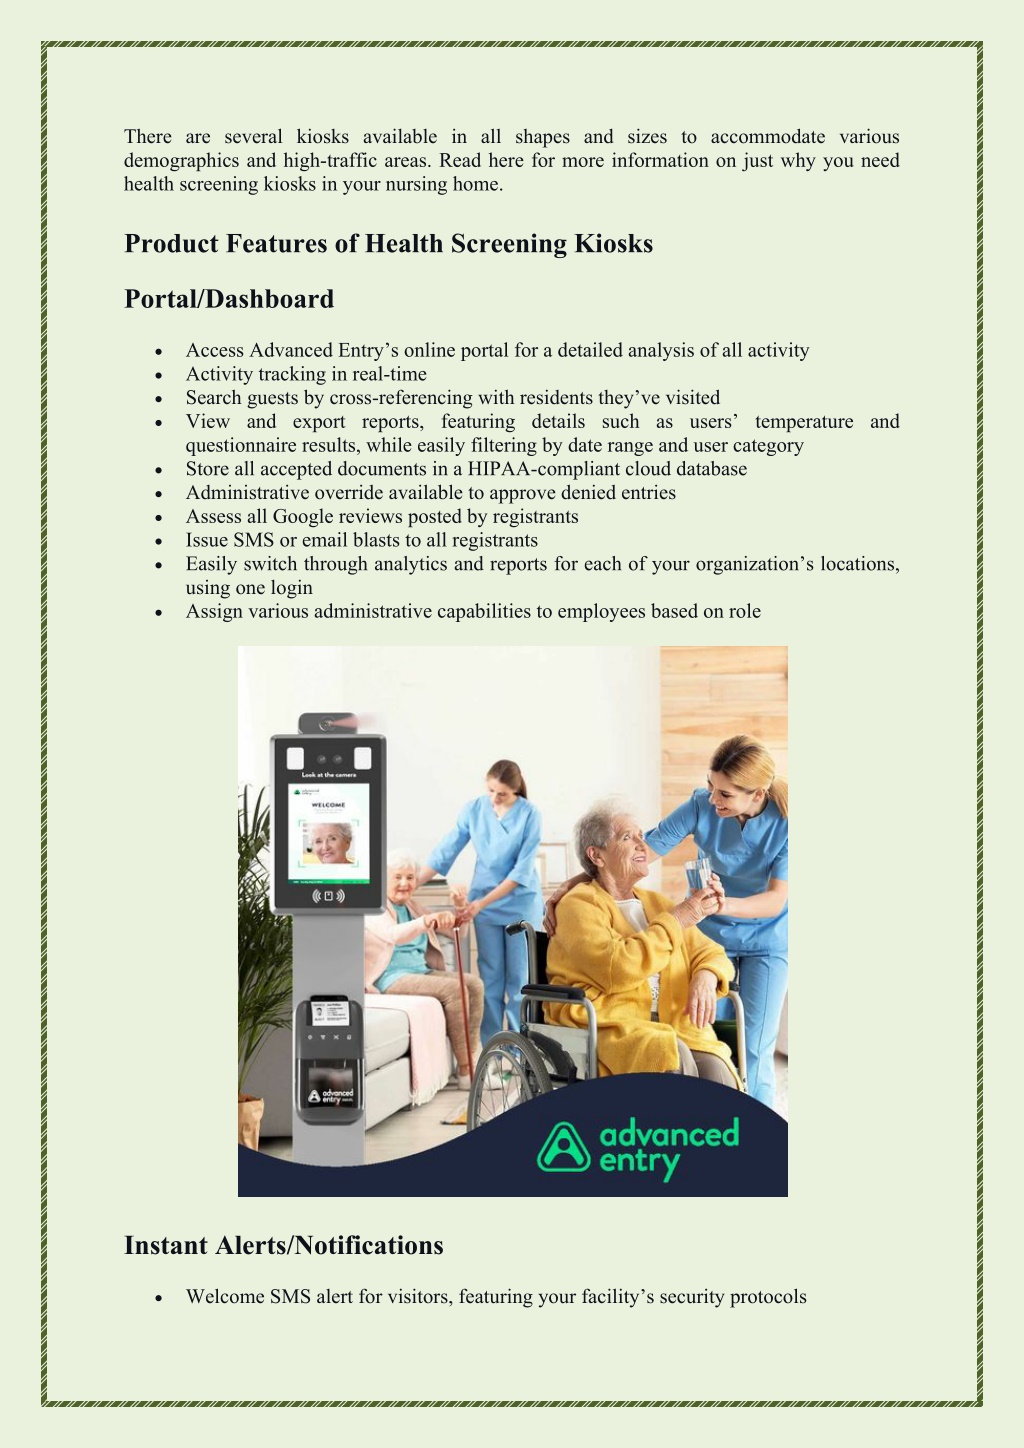 Ppt What Is A Health Screening Kiosk And Why Is It Important For Nursing Homes Powerpoint 9612